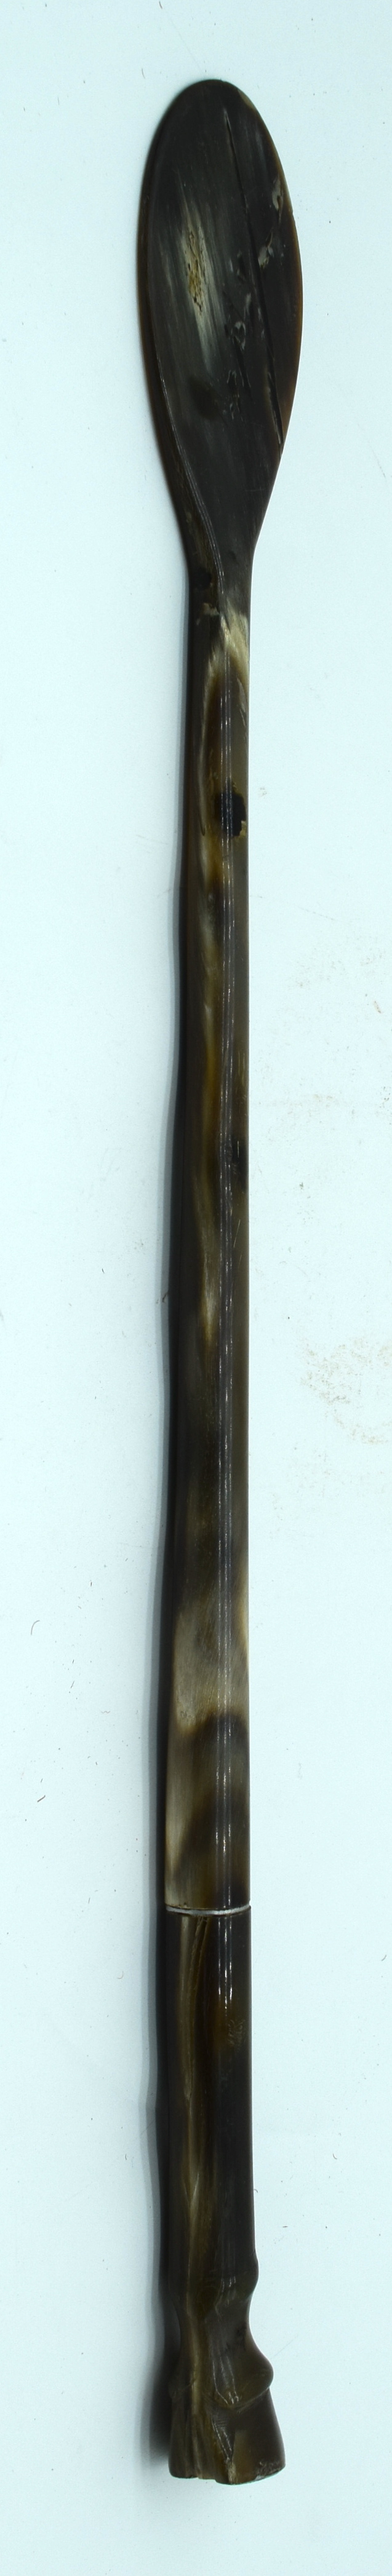 A RARE 19TH CENTURY MIDDLE EASTERN CARVED RHINOCEROS HORN SWAGGER STICK with shoe horn terminal. 180